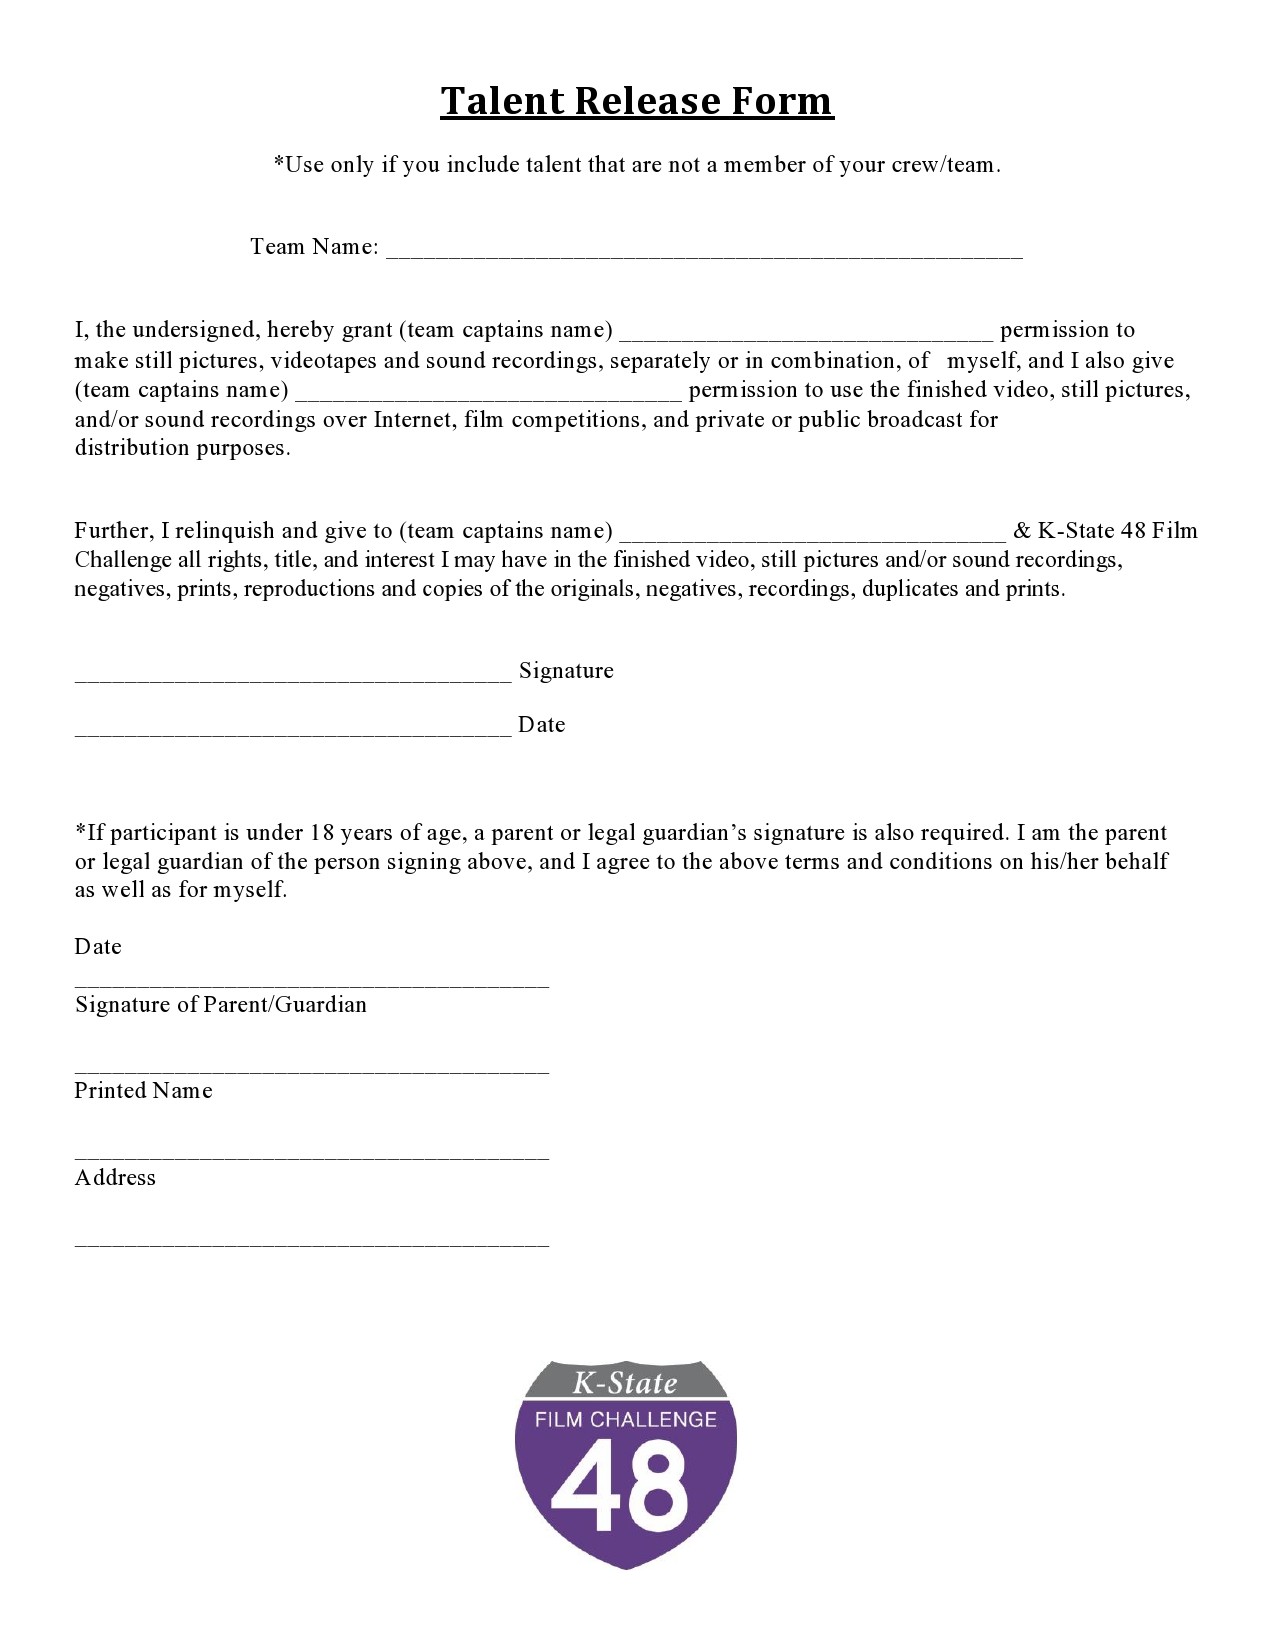 Free talent release form 45